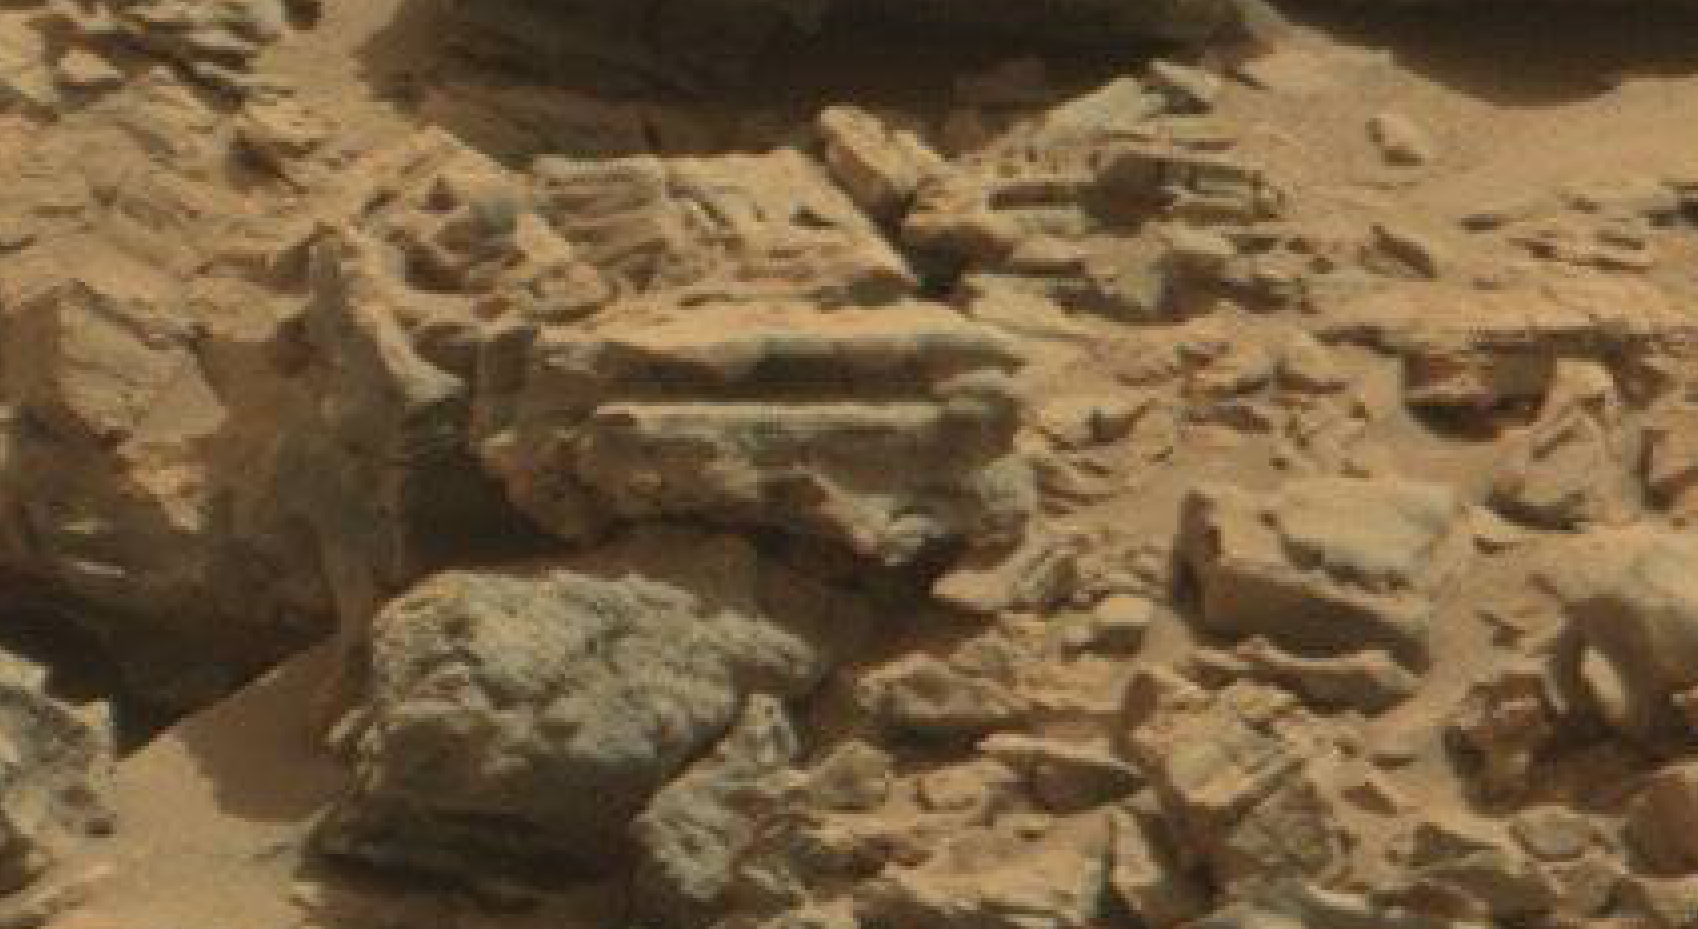 mars anomaly horse and other items sol 712 was life on mars